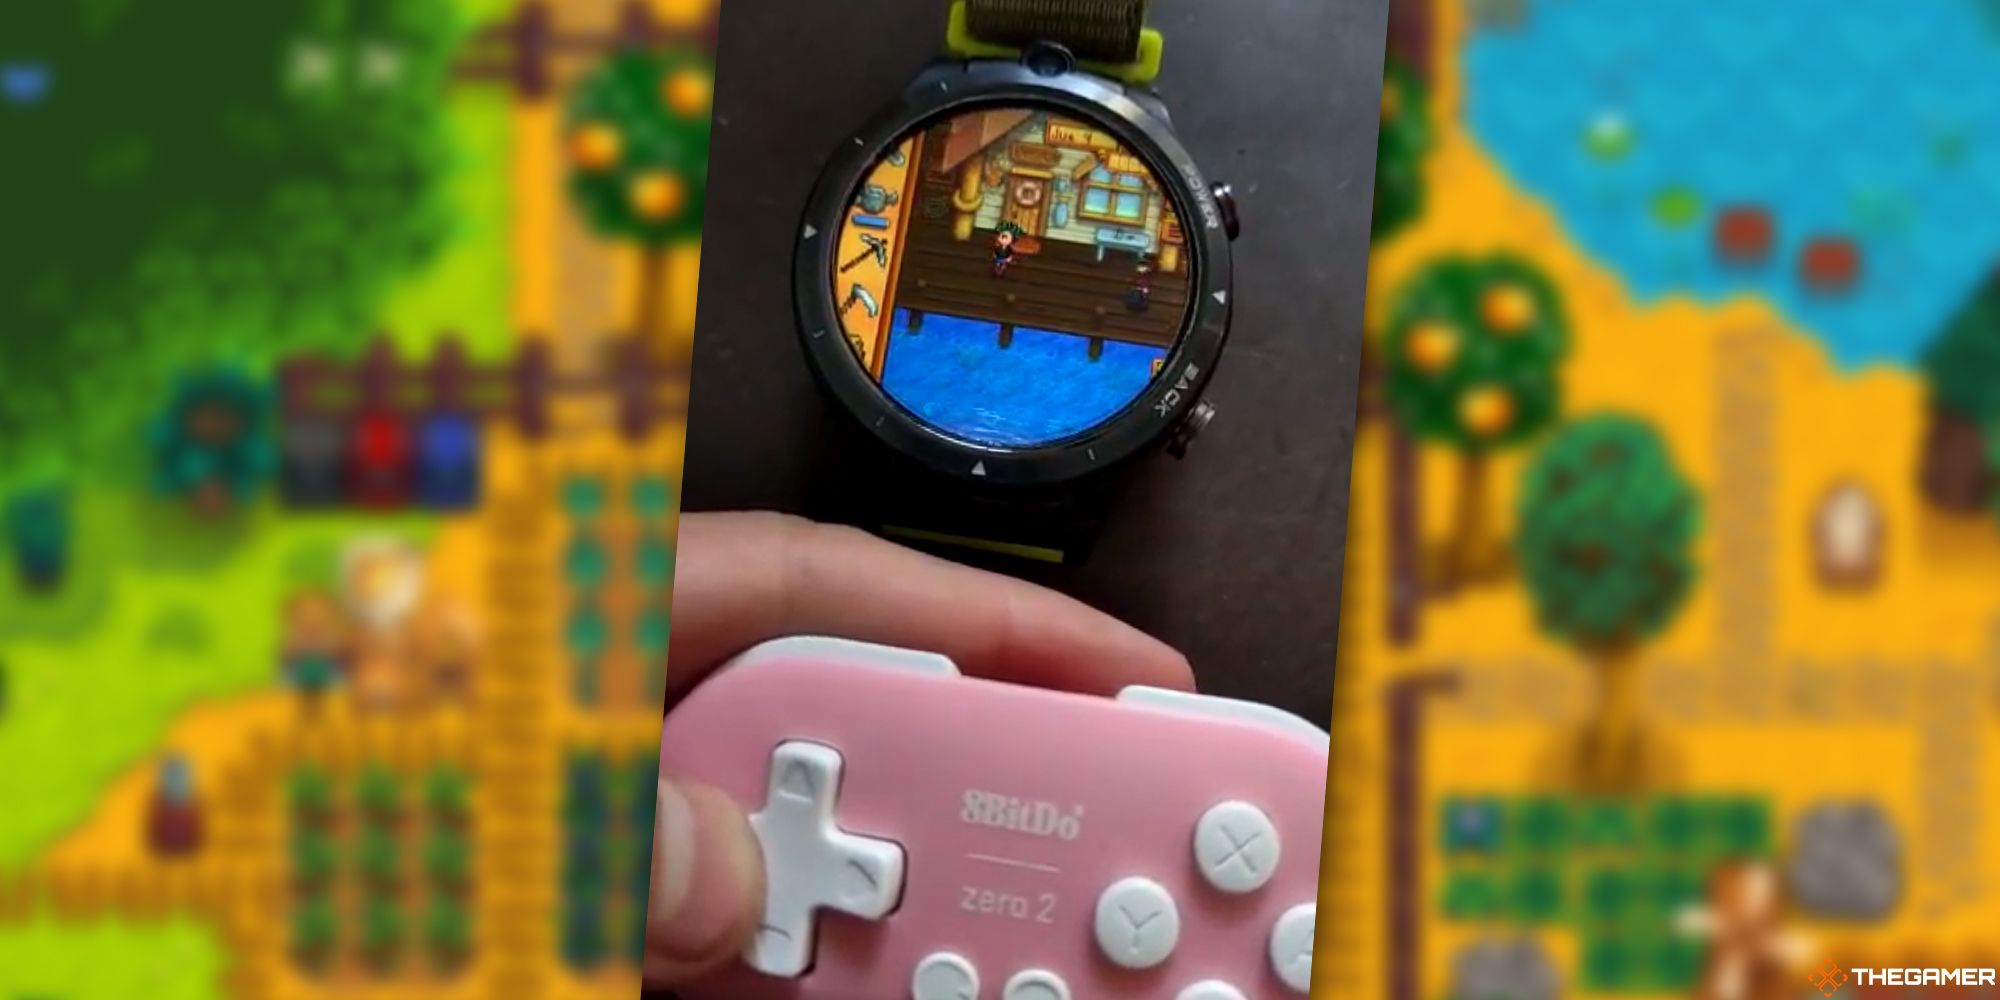 Stardew Valley on an Android Watch with a pink 8BitDo controller